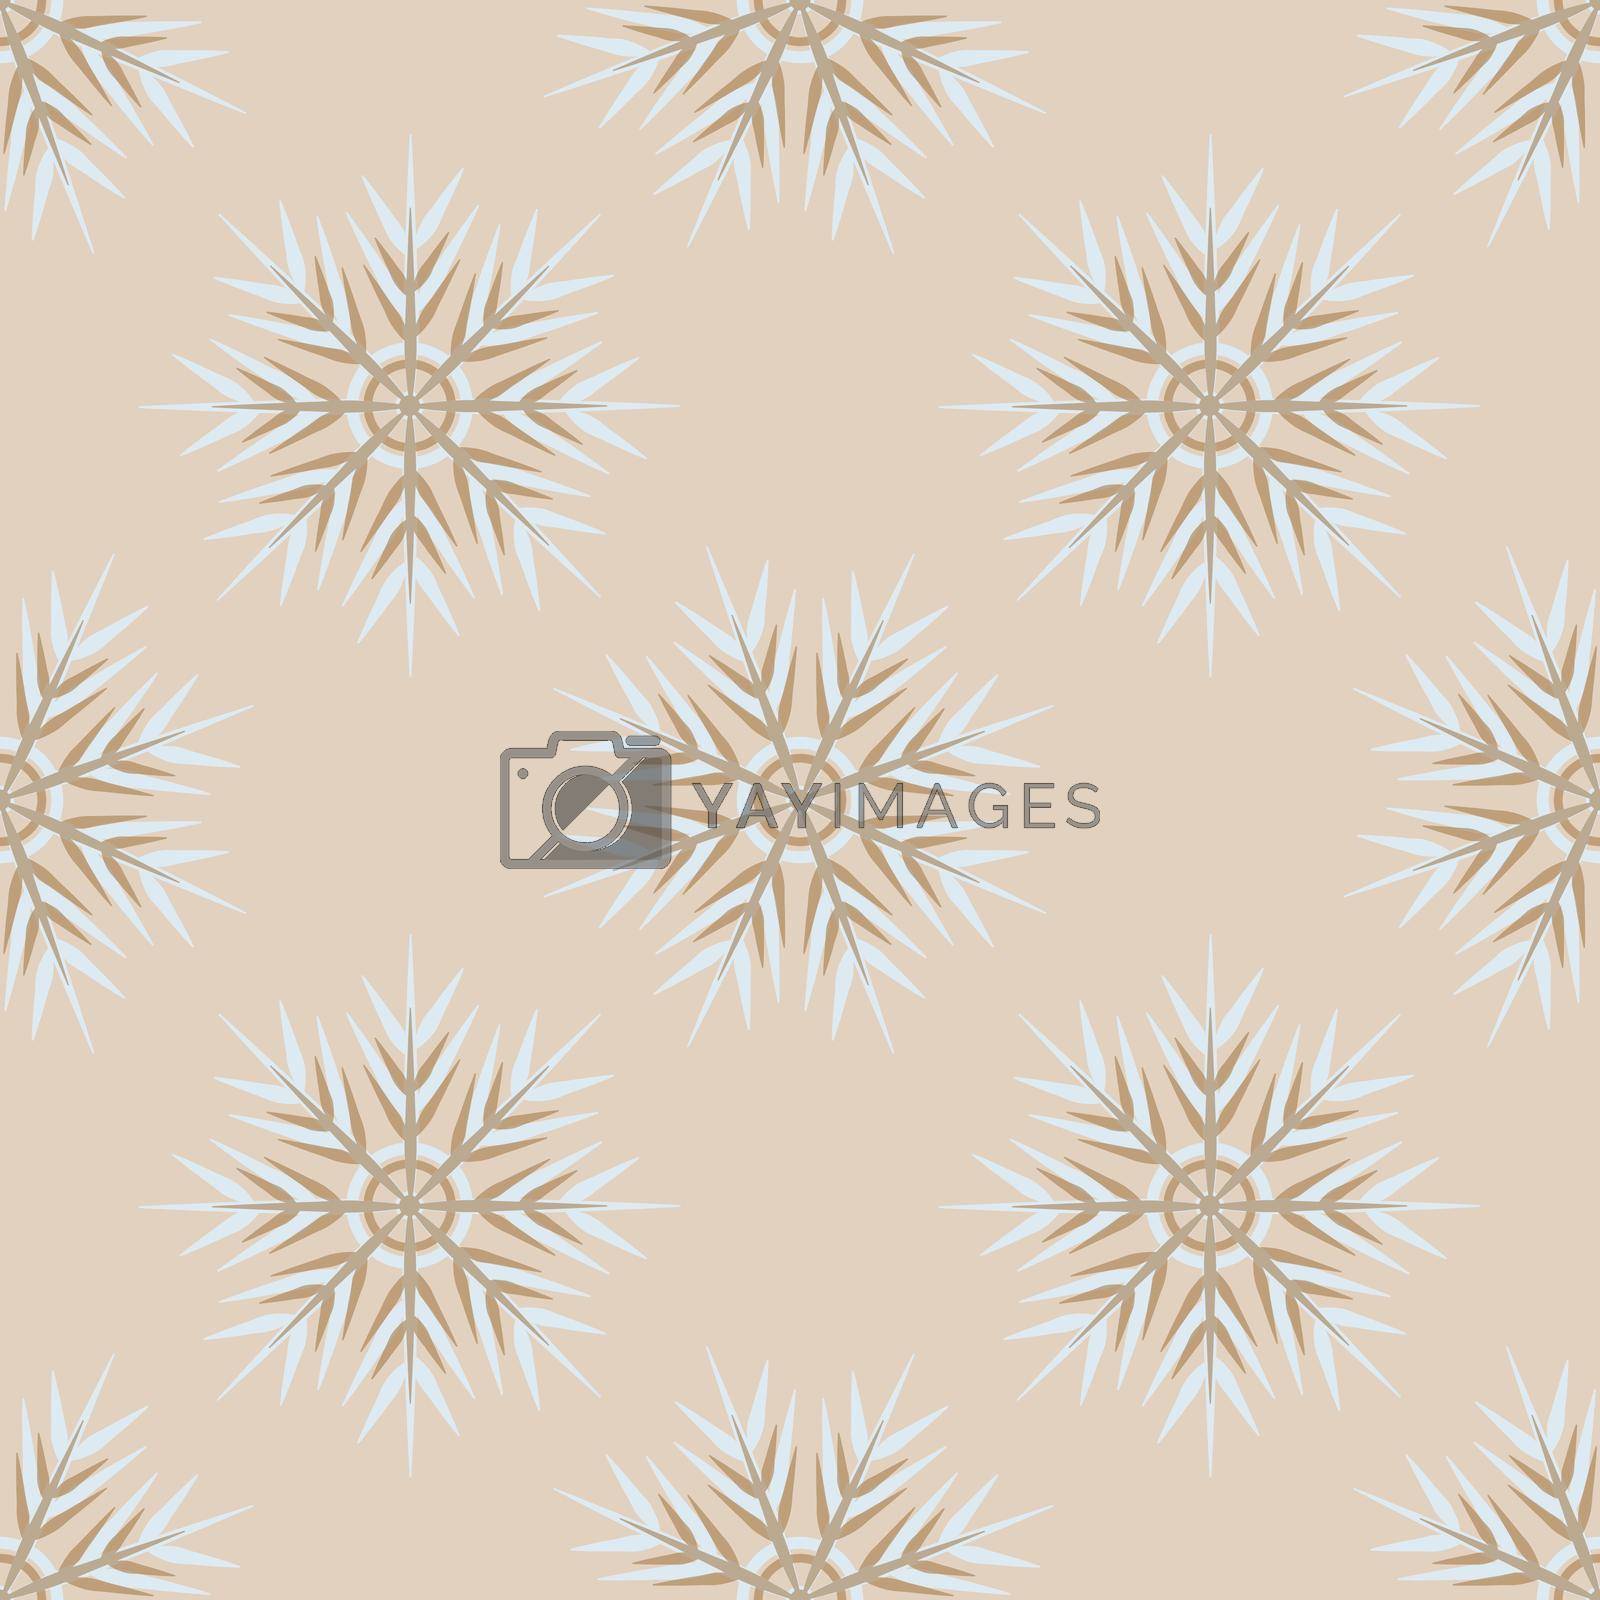 Royalty free image of A seamless pattern on a square background is snowflakes. Design element by p-i-r-a-n-y-a